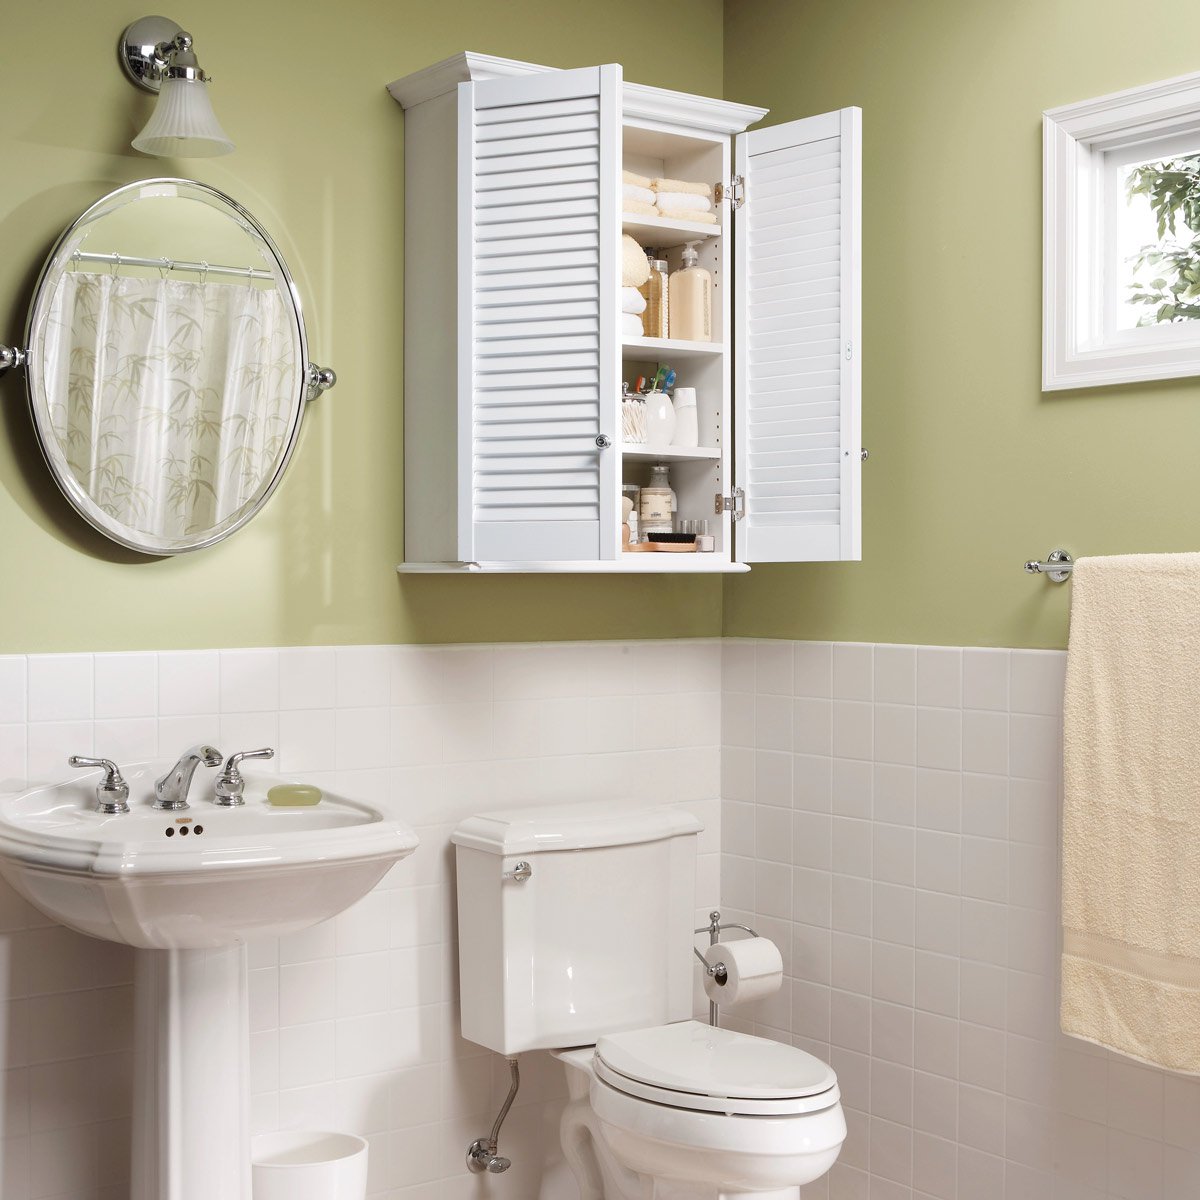 5 Ways to Install Glass Display in Bathroom Queries